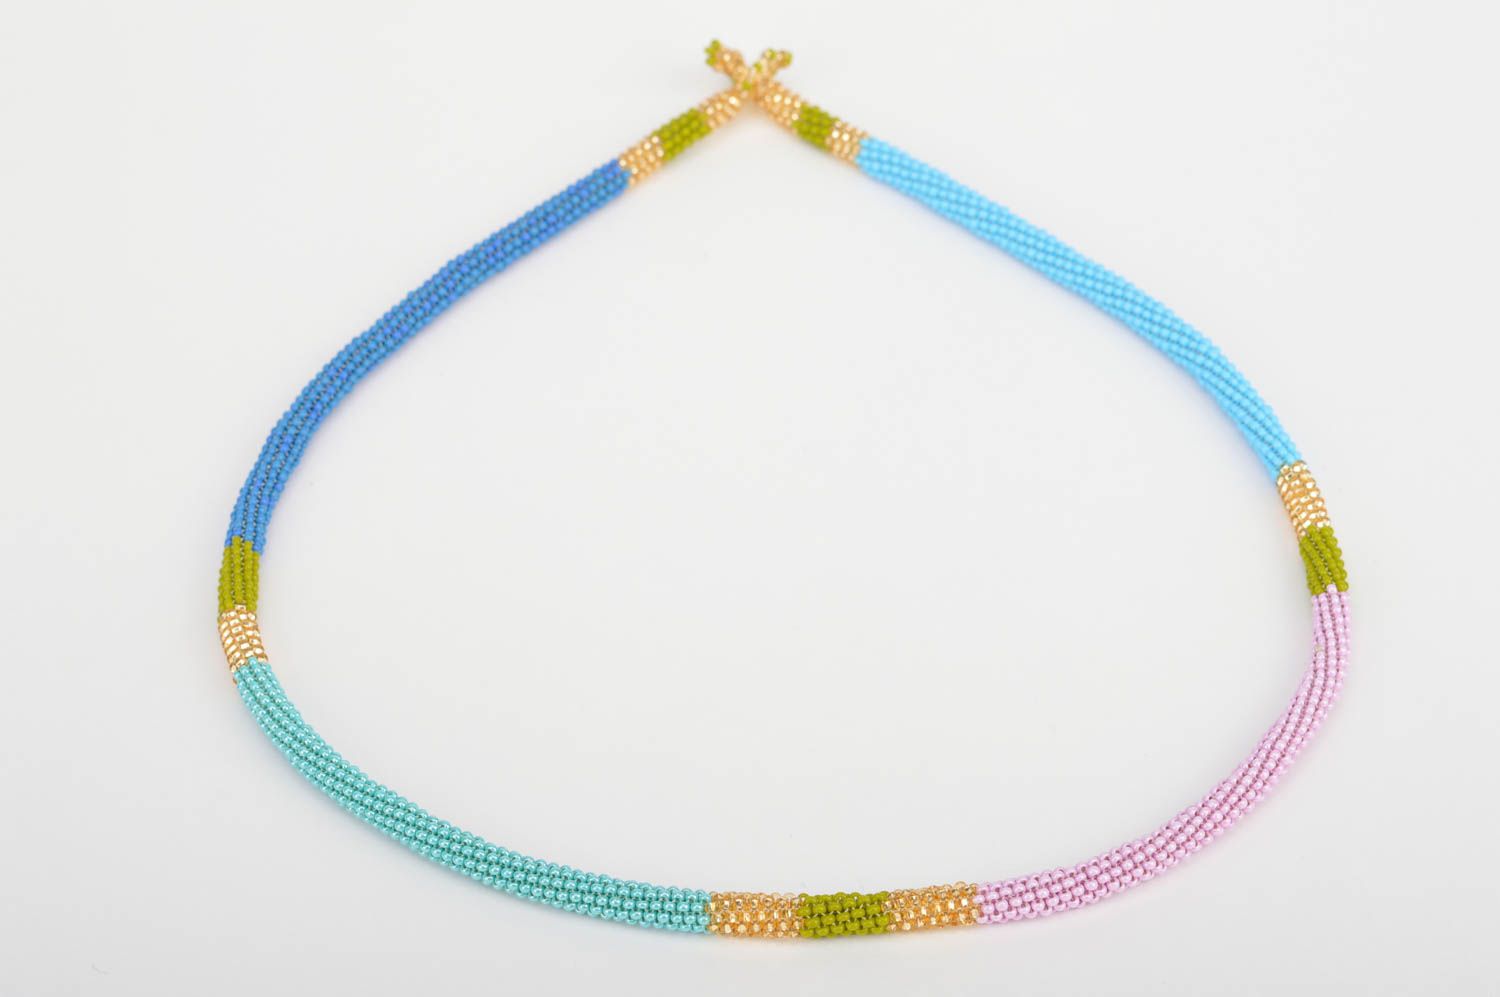 Bright stylish homemade designer beaded cord necklace for fashionistas photo 2